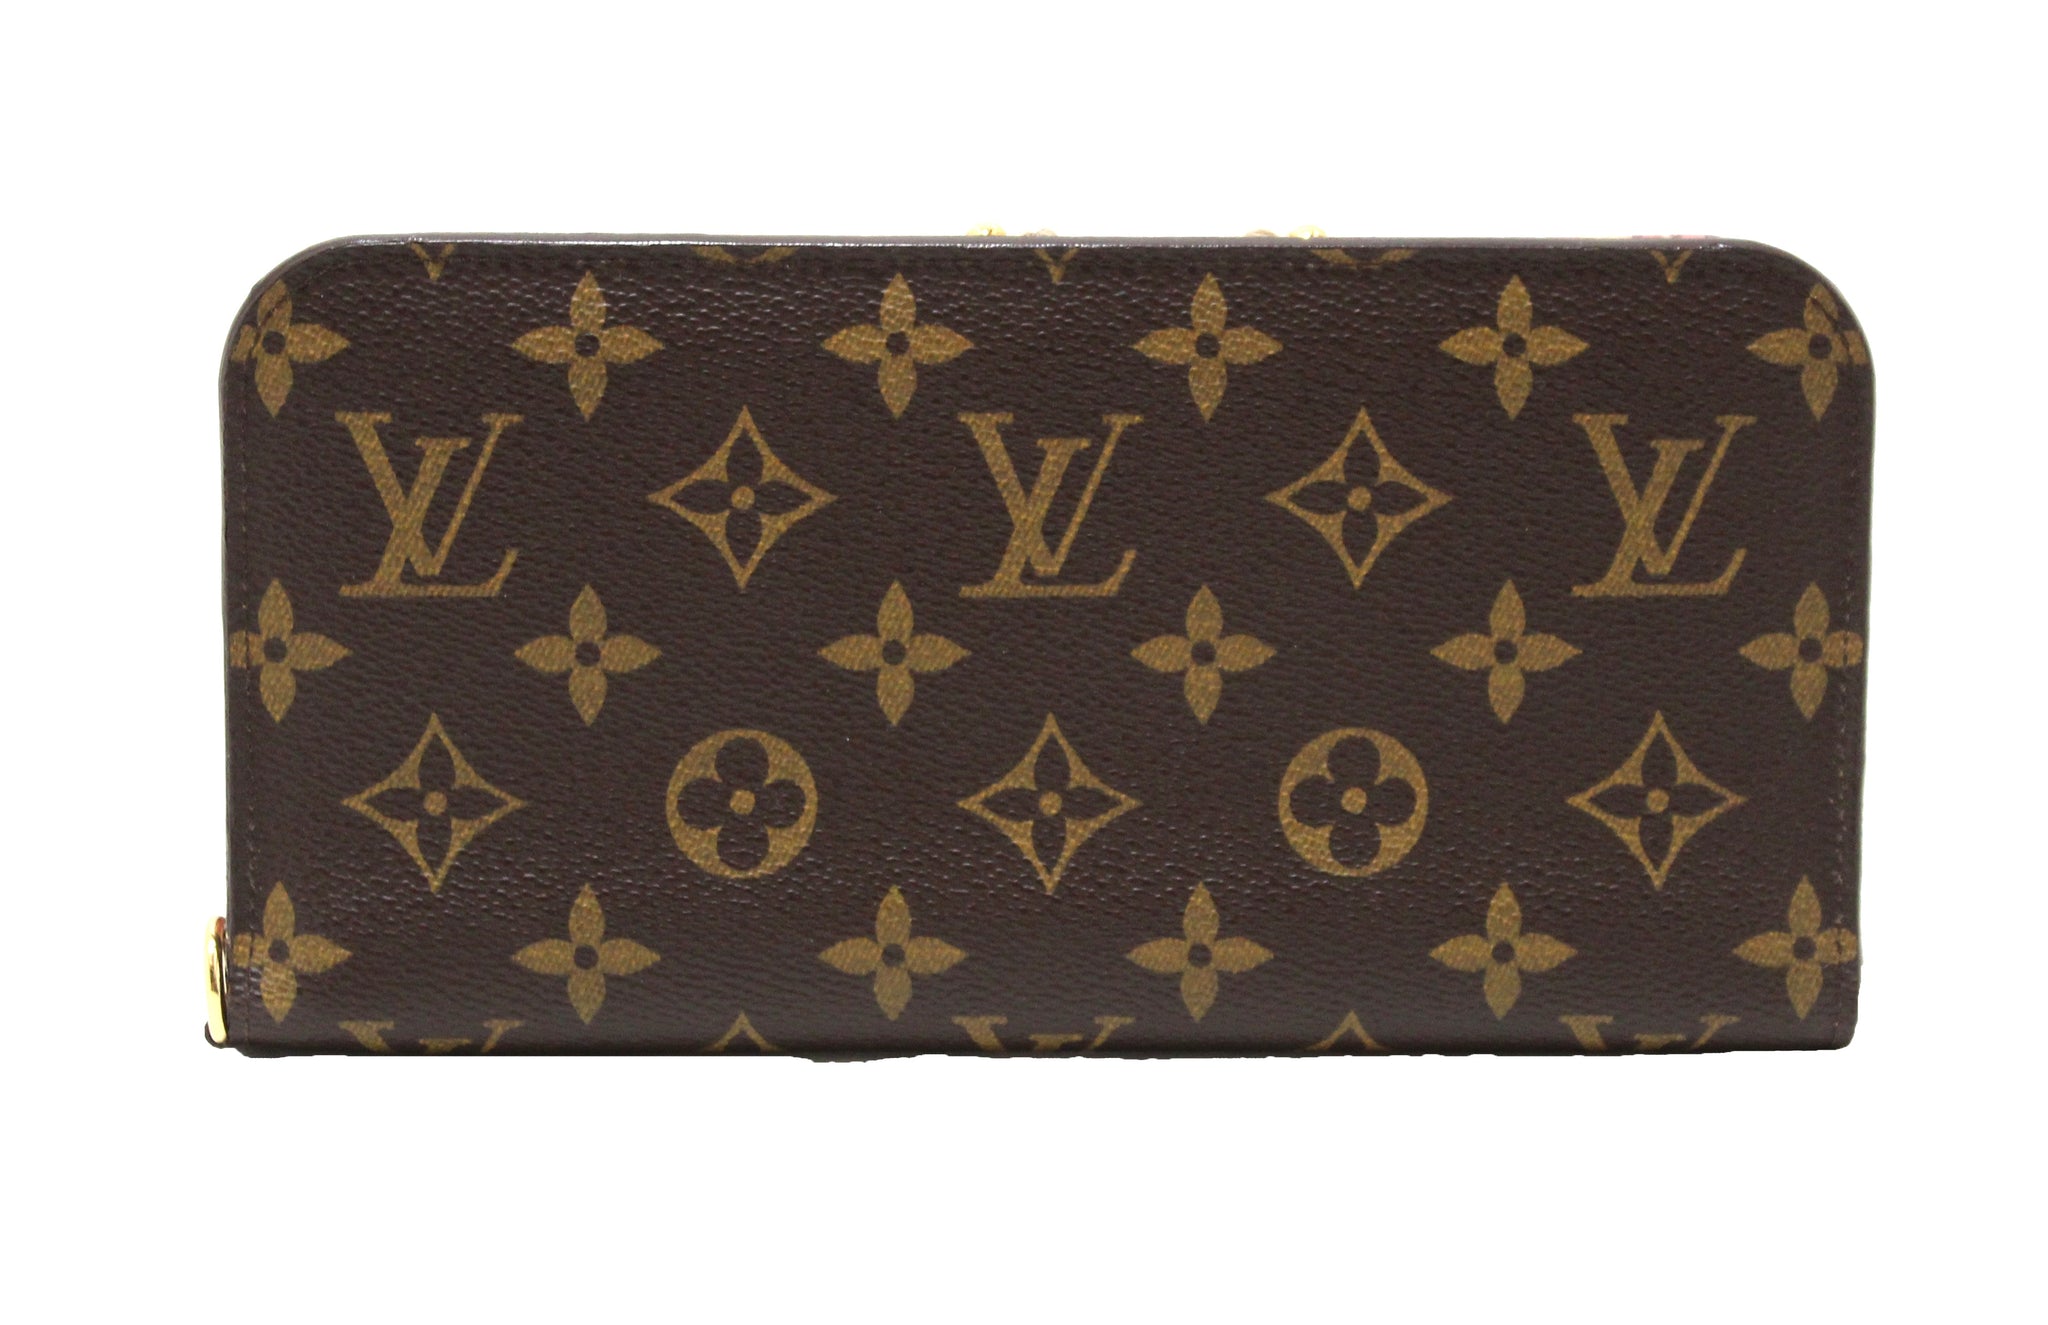 Preloved LOUIS VUITTON Limited Edition Stephen Sprouse Monogram